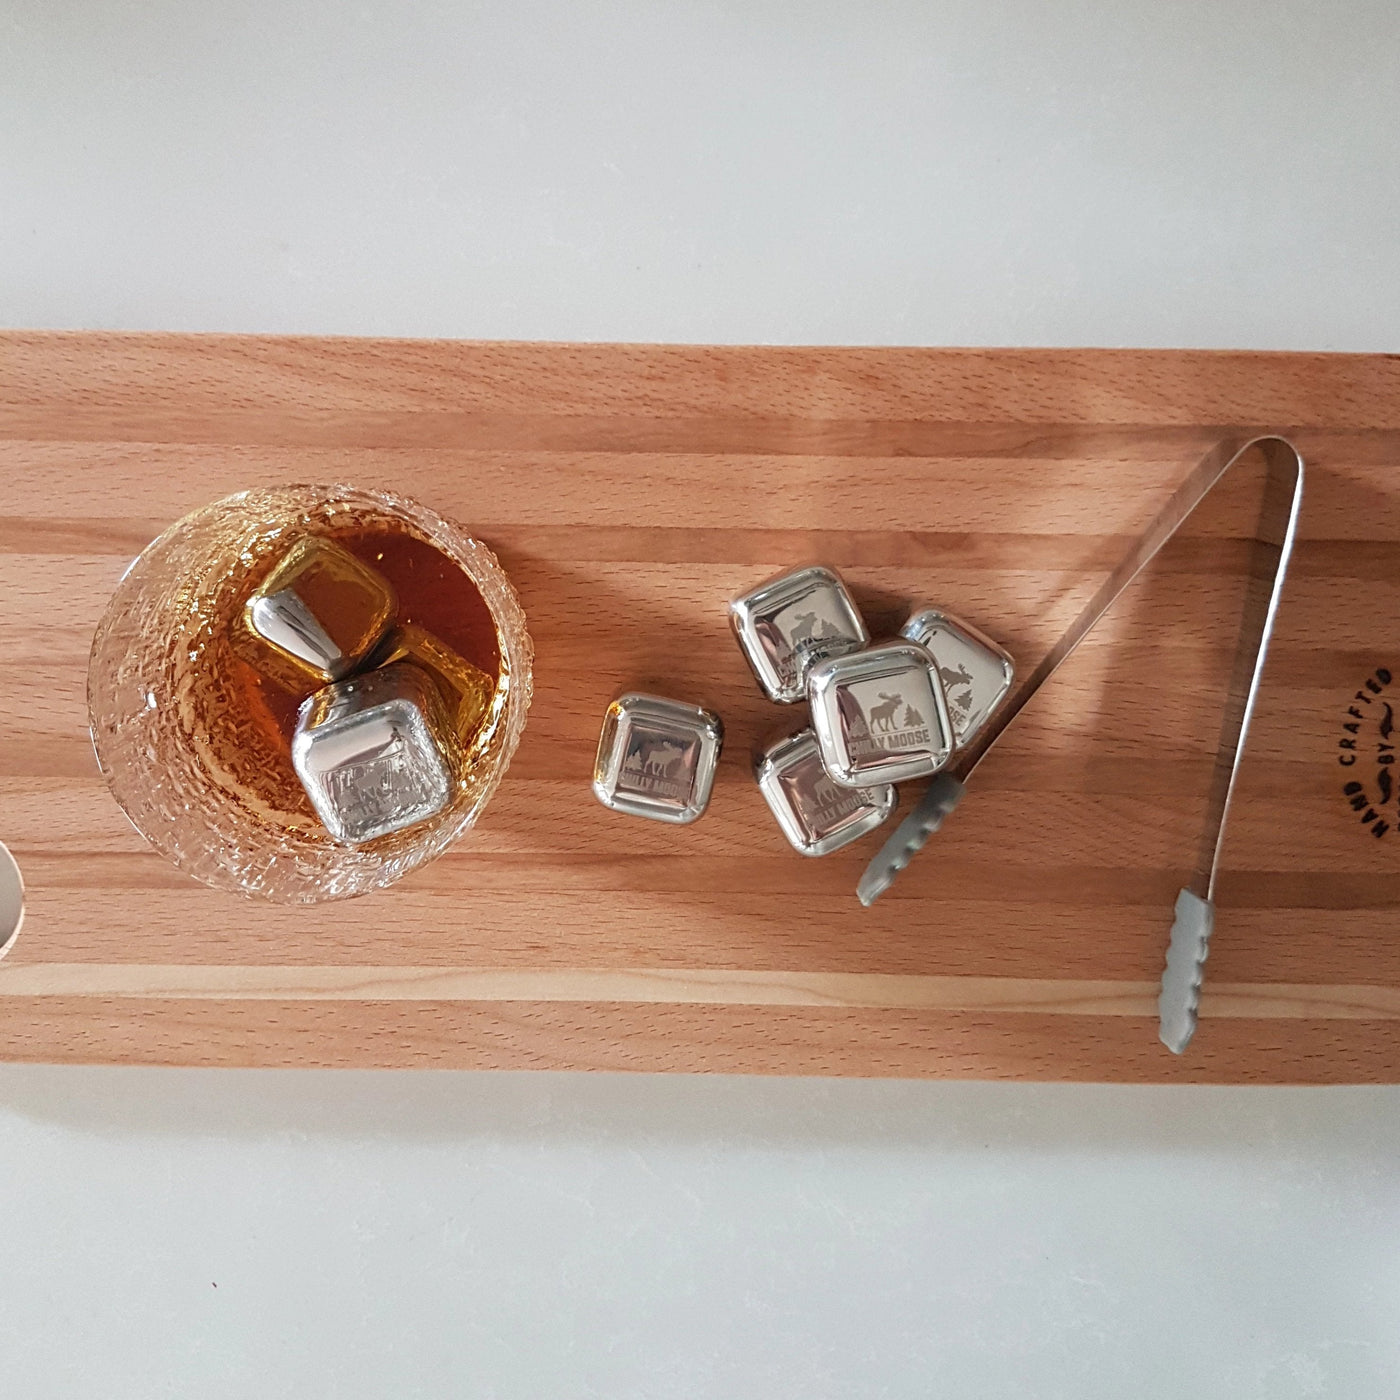 Three Chilly Moose stainless steel reusable ice cubes in a cocktail glass with the remainder stacked beside with included tongs, displayed on a wooden cutting board